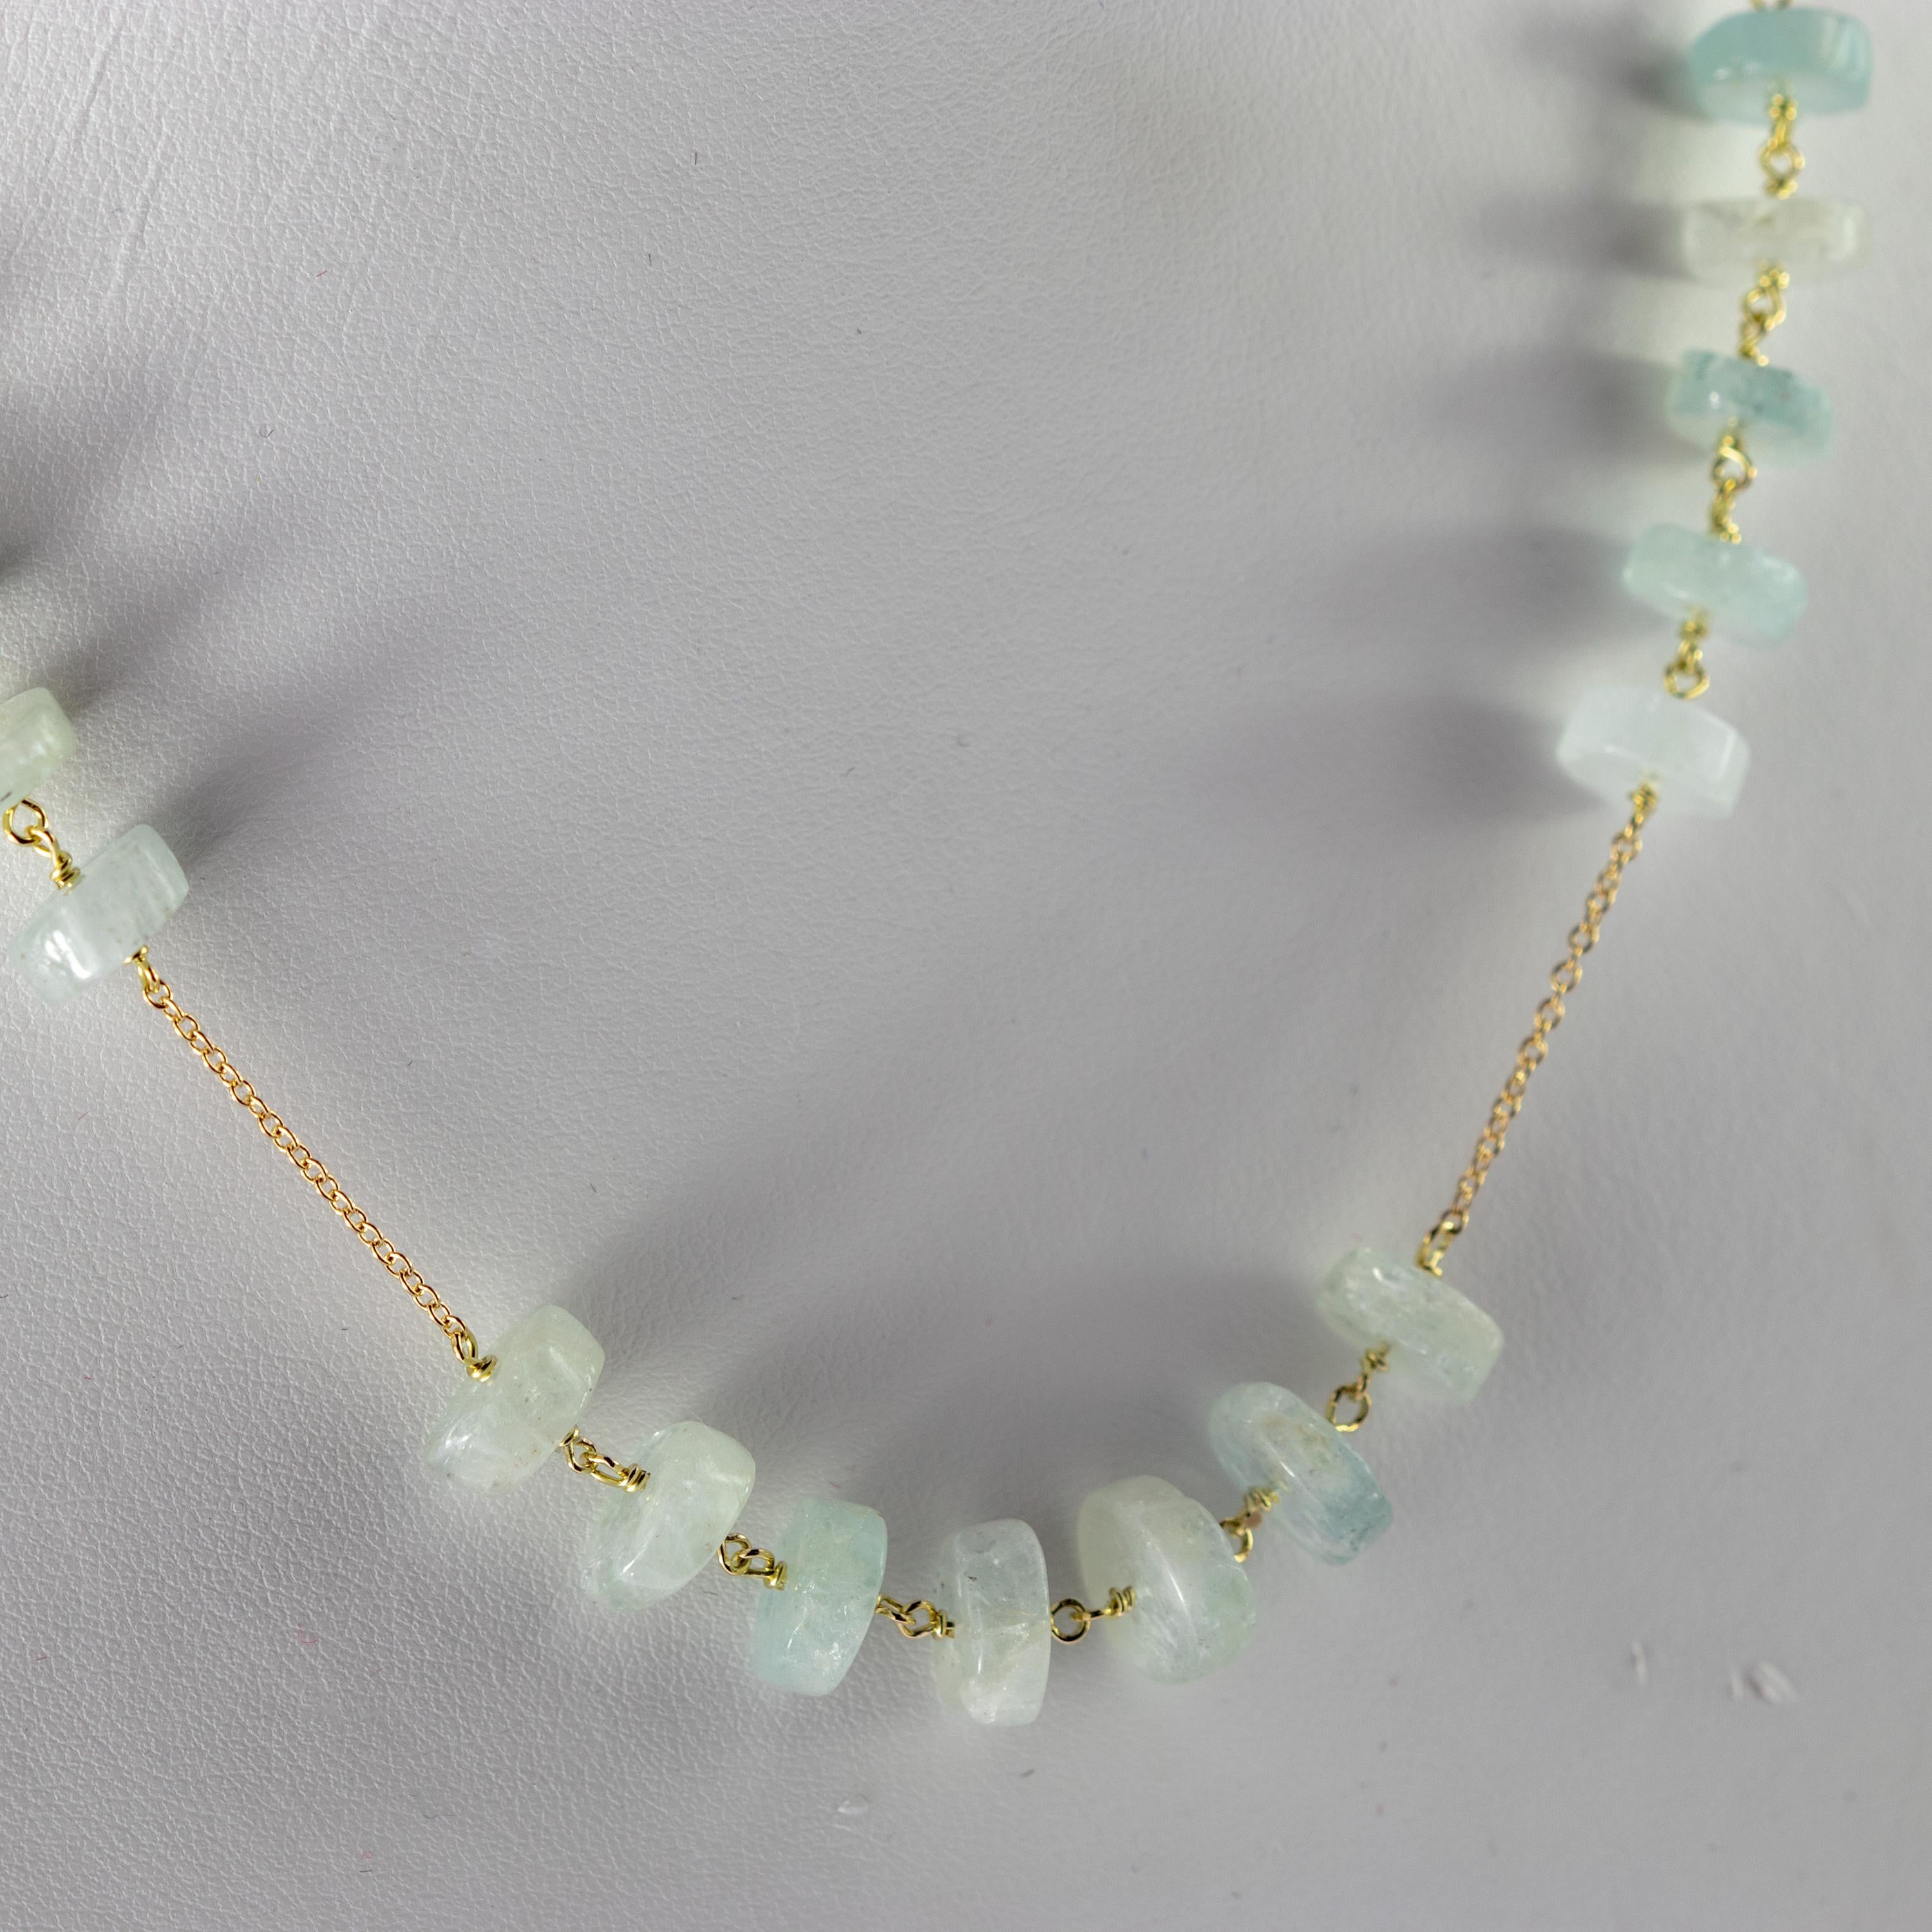 Magnificent natural precious jewellery on elegant 9 karat yellow gold setting. Marvellous necklace starring pure aquamarine raw rondelles, for a bright charm of uniqueness.
 
An elegant touch of glamour at your fingertips. Let yourself be tempted by